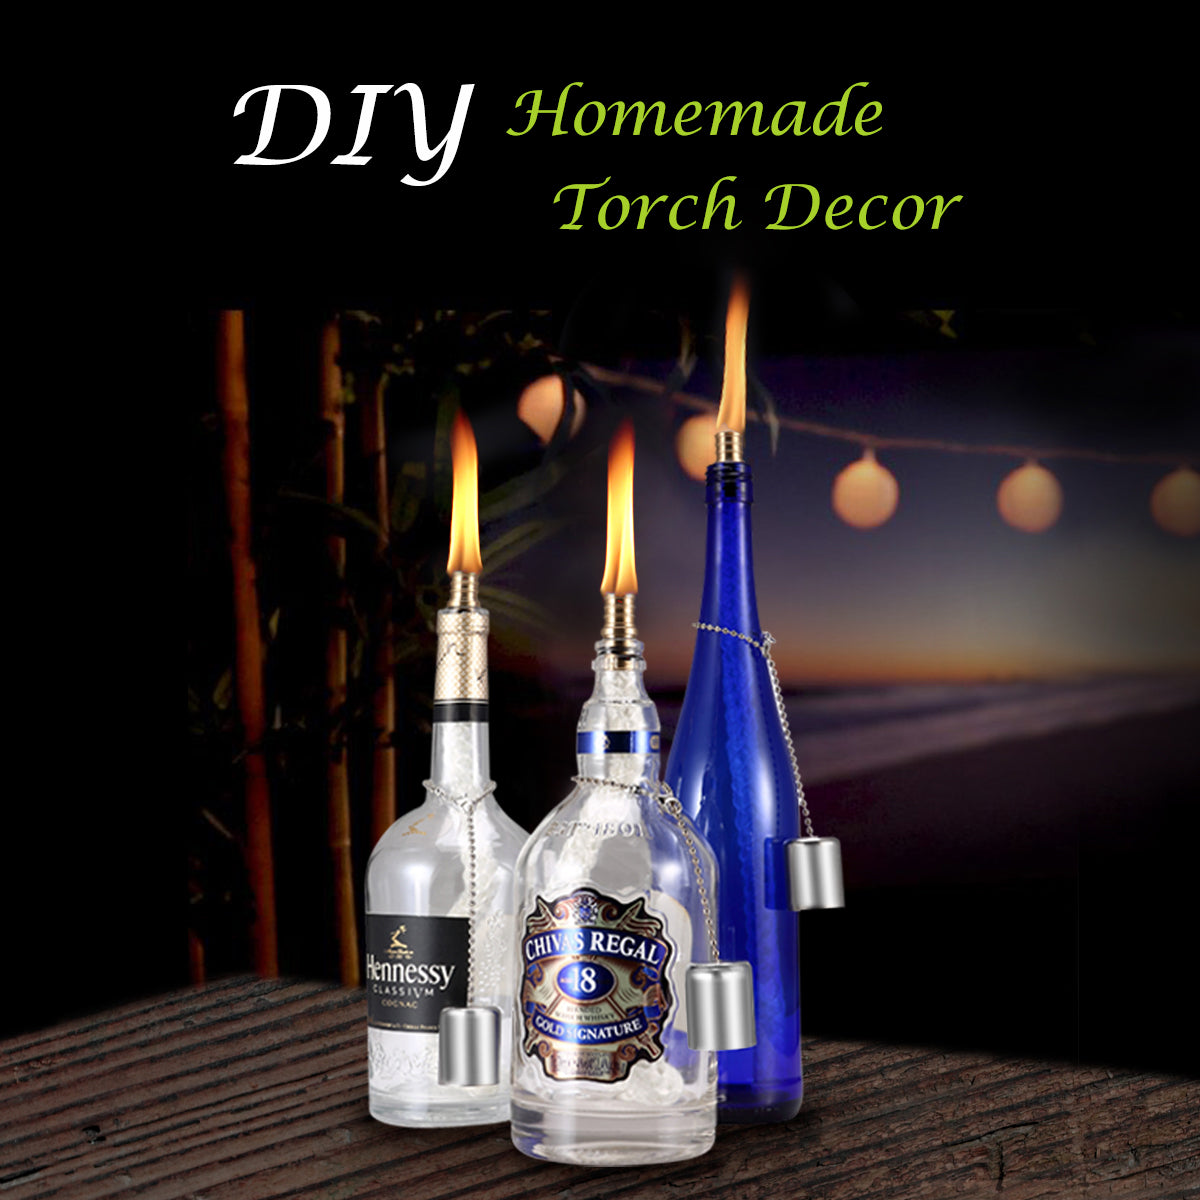 Used LANMU wicks kit and wine bottle to DIY your own torch light.